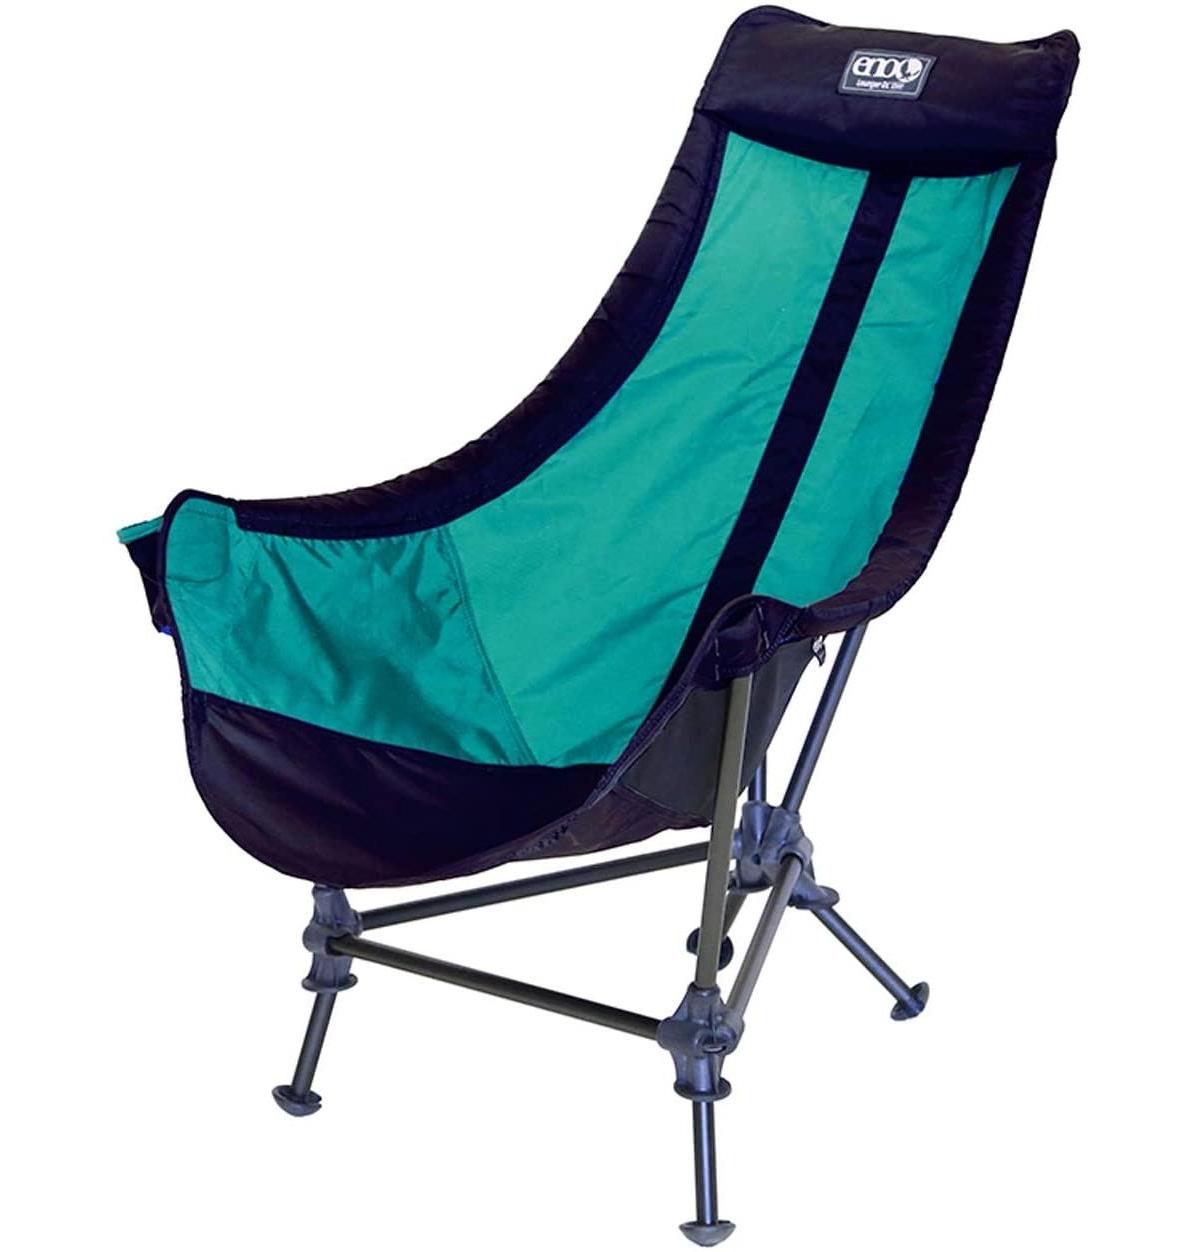 Lounger Dl Chair - Portable Outdoor Hiking, Backpacking, Beach, Camping, and Festival Chair - Navy/Seafoam - Navy/Seafoam